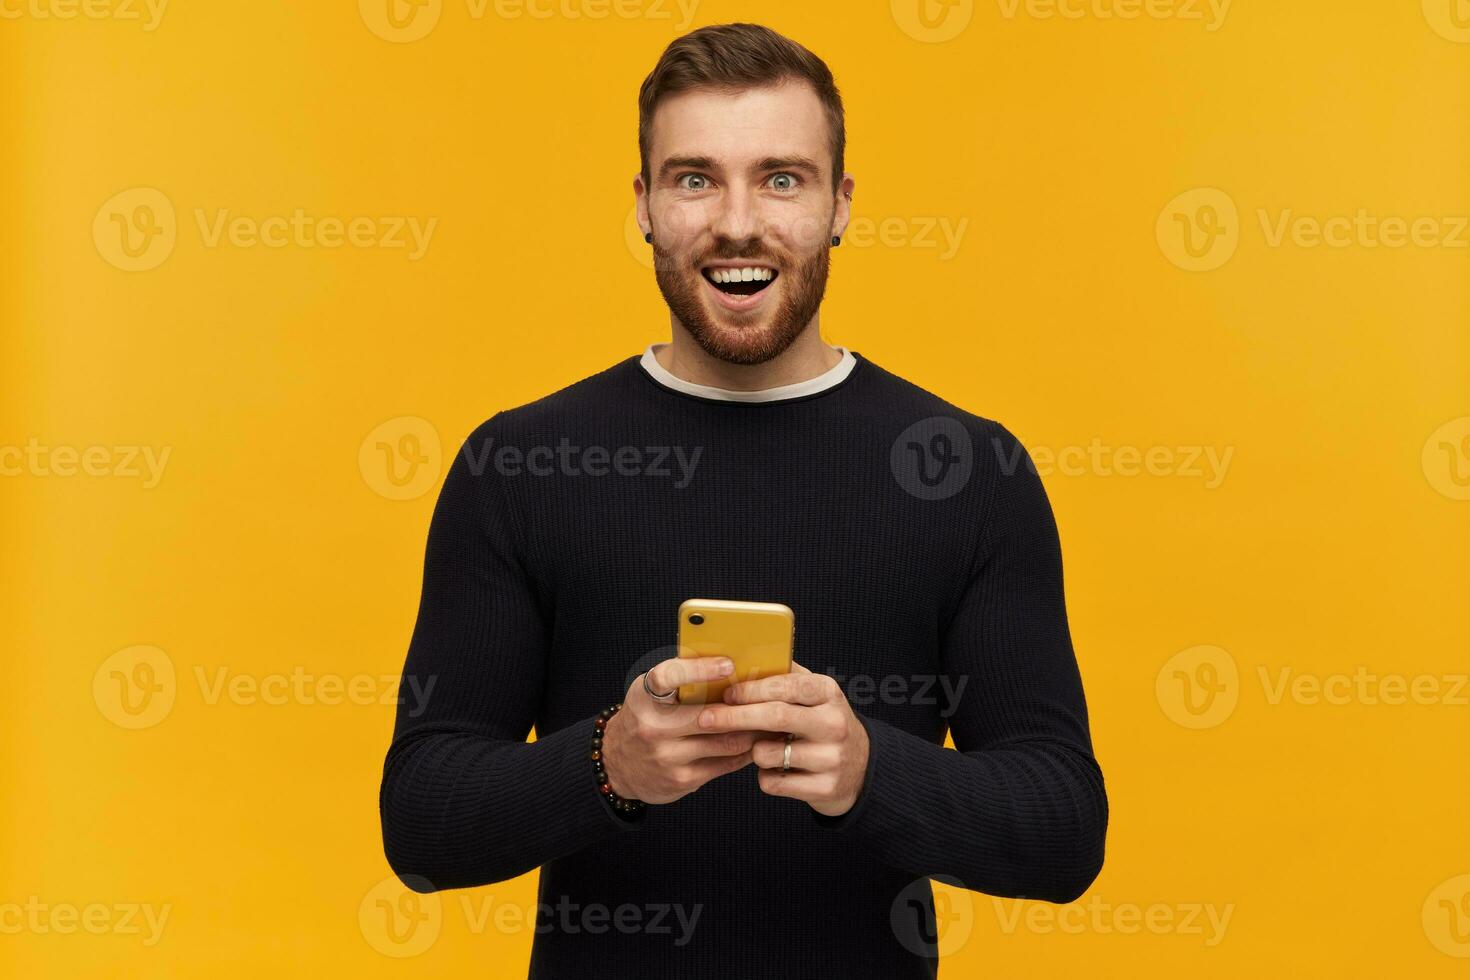 Portrait of cheerful, smiling male with brunette hair and beard. Has piercing. Wearing black sweater. Holding a smartphone. Watching excited at the camera, isolated over yellow background photo